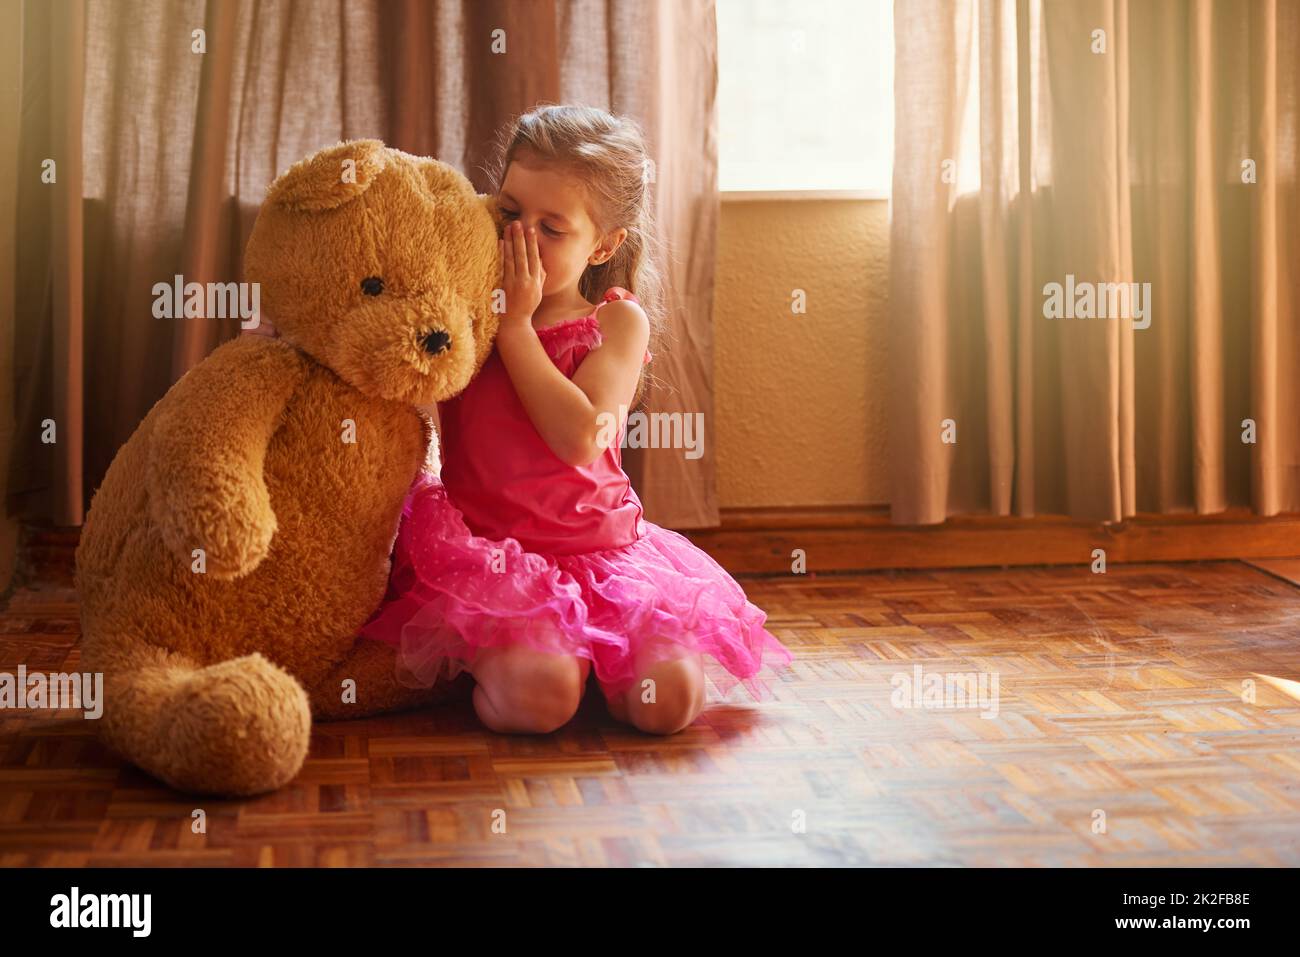 Teddy is the only one who can keep a secret. Shot of a little girl whispering something in her teddy bears ear. Stock Photo